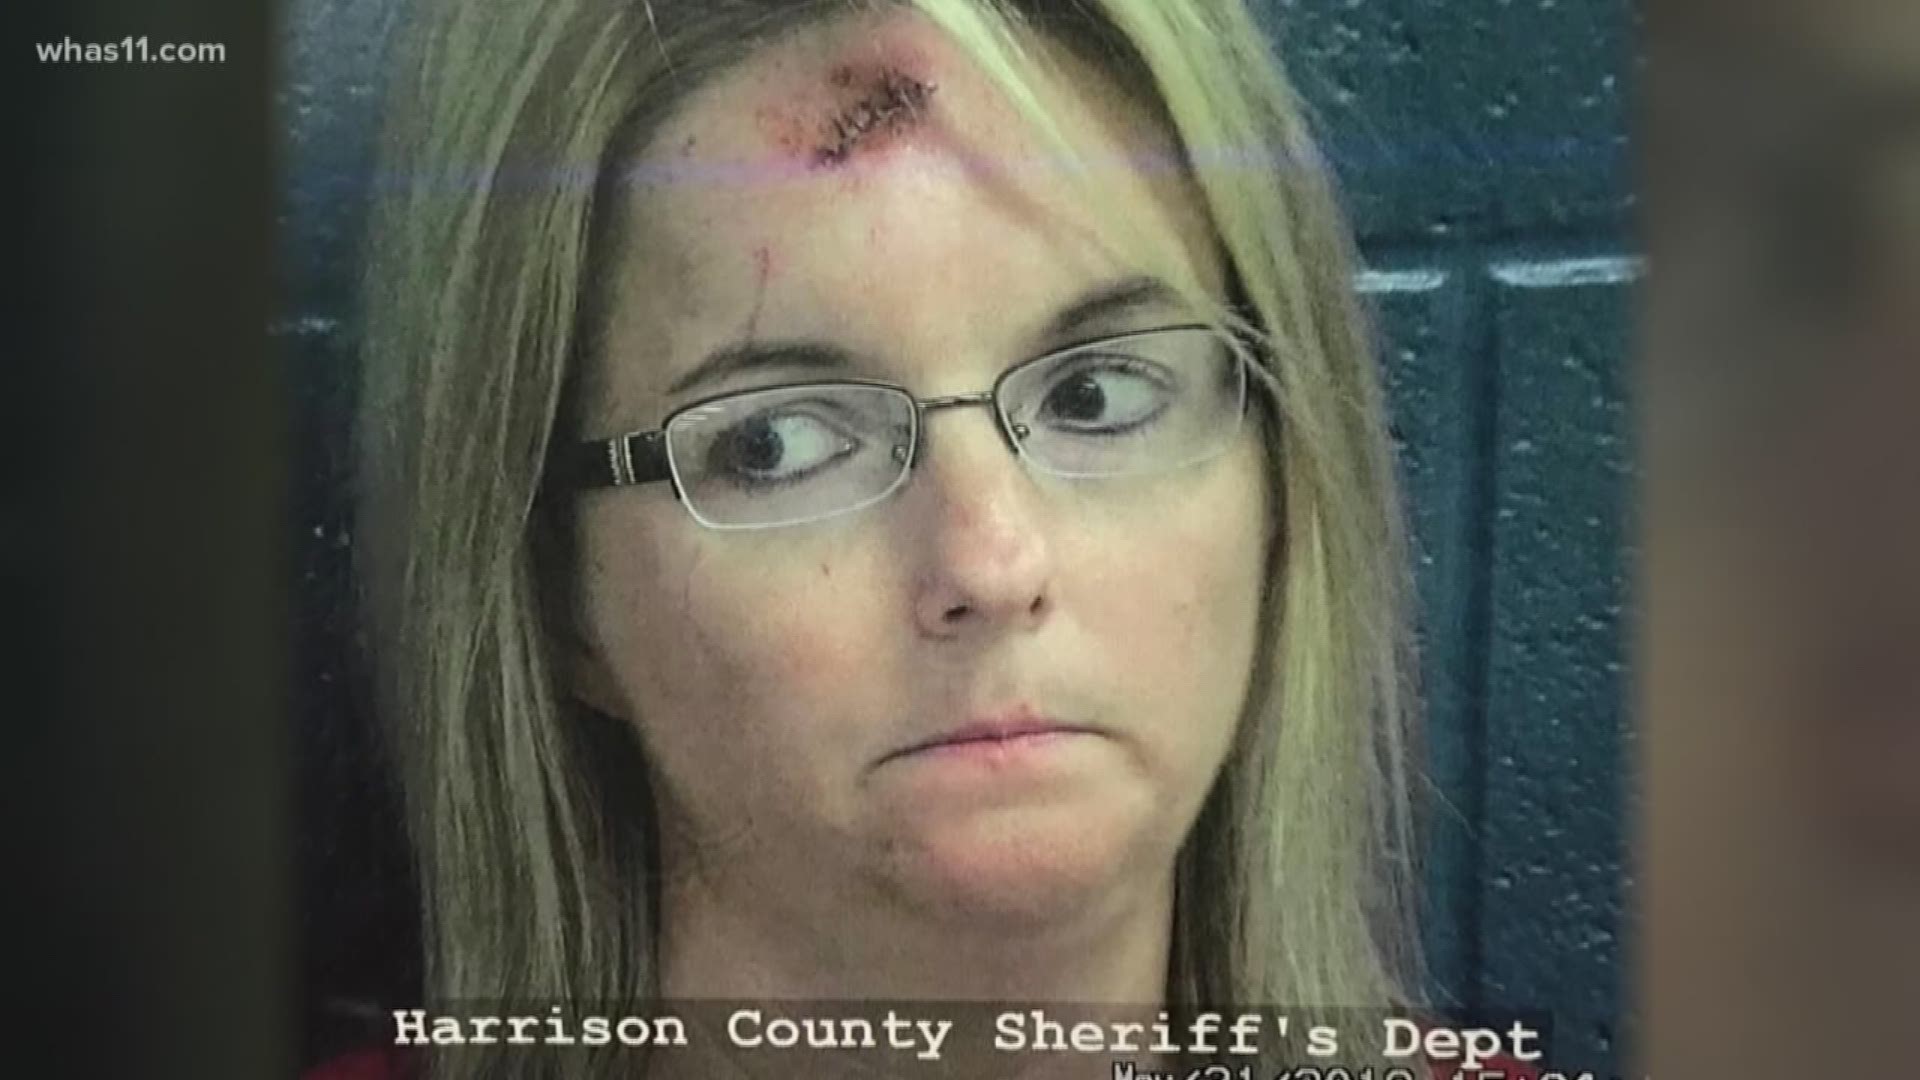 Tami Herrold has been accused of stealing $57,000 from Corydon Elementary